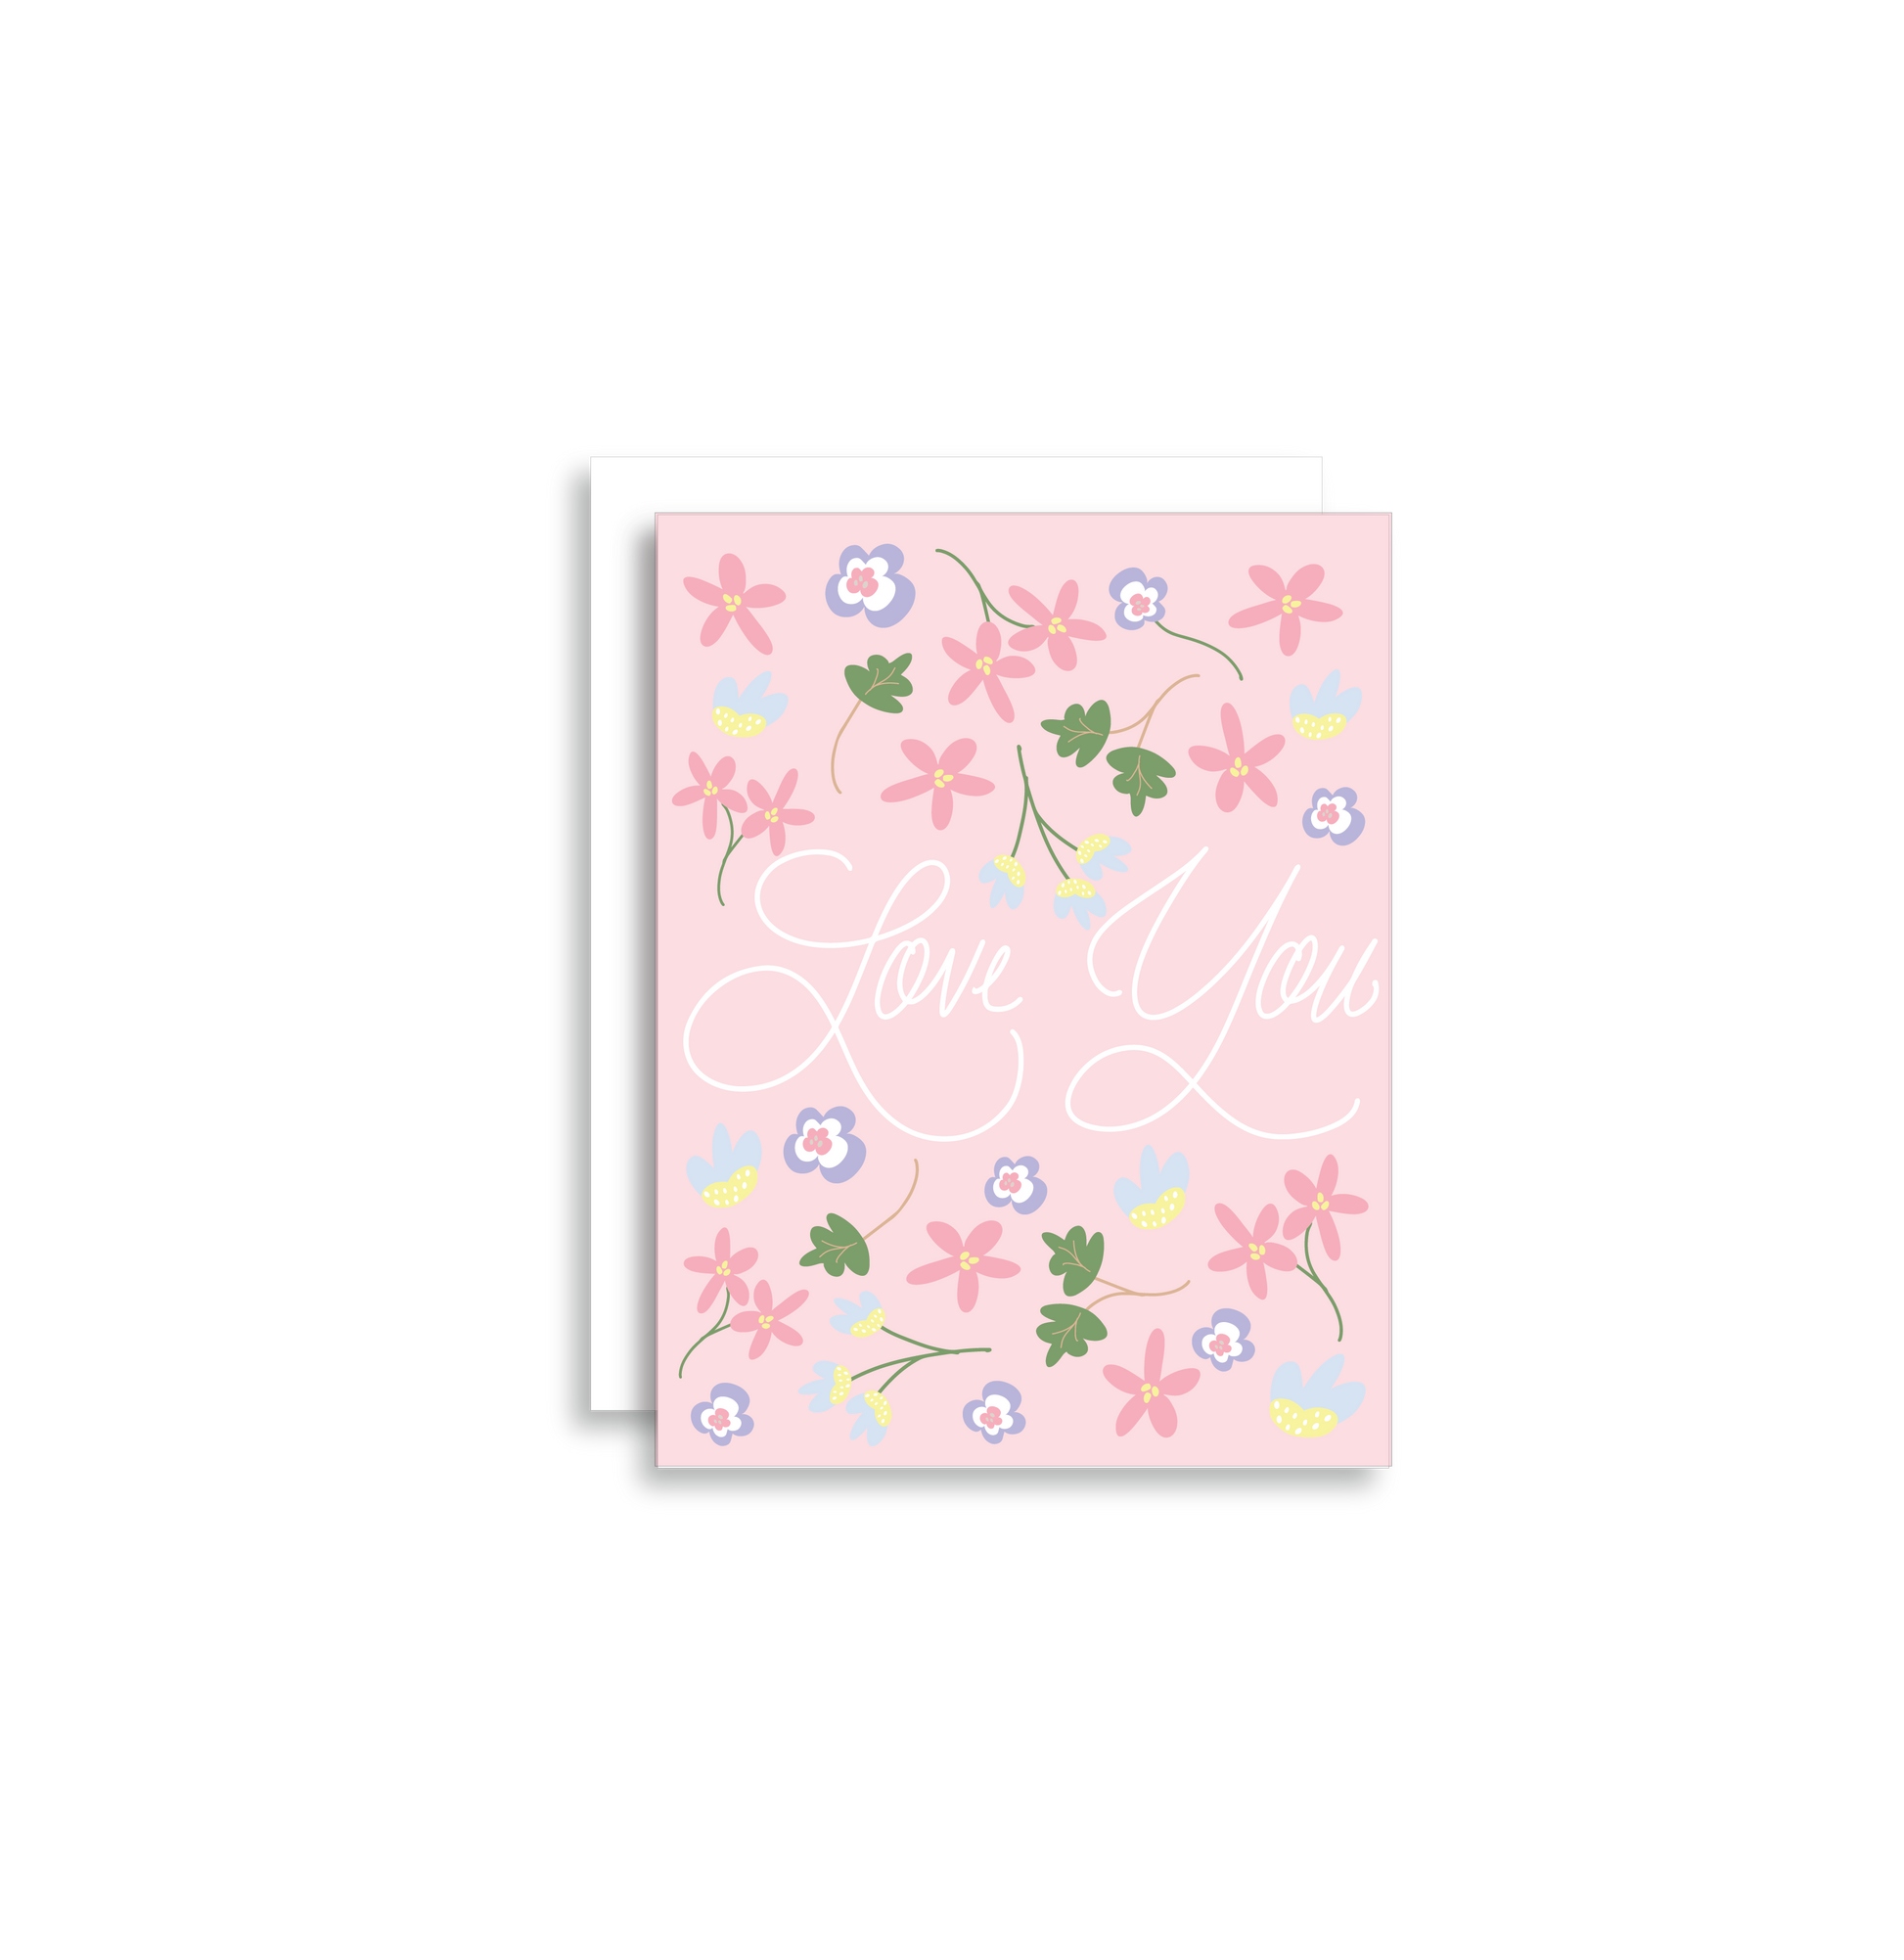 Our "Love You" card is the perfect card for an anniversary, wedding, valentines day - or a "just because" card! Each card is folded to 4.25" tall by 5.5" wide, is blank inside and comes with a matching white envelope. Cards are packaged in cellophane sleeves.